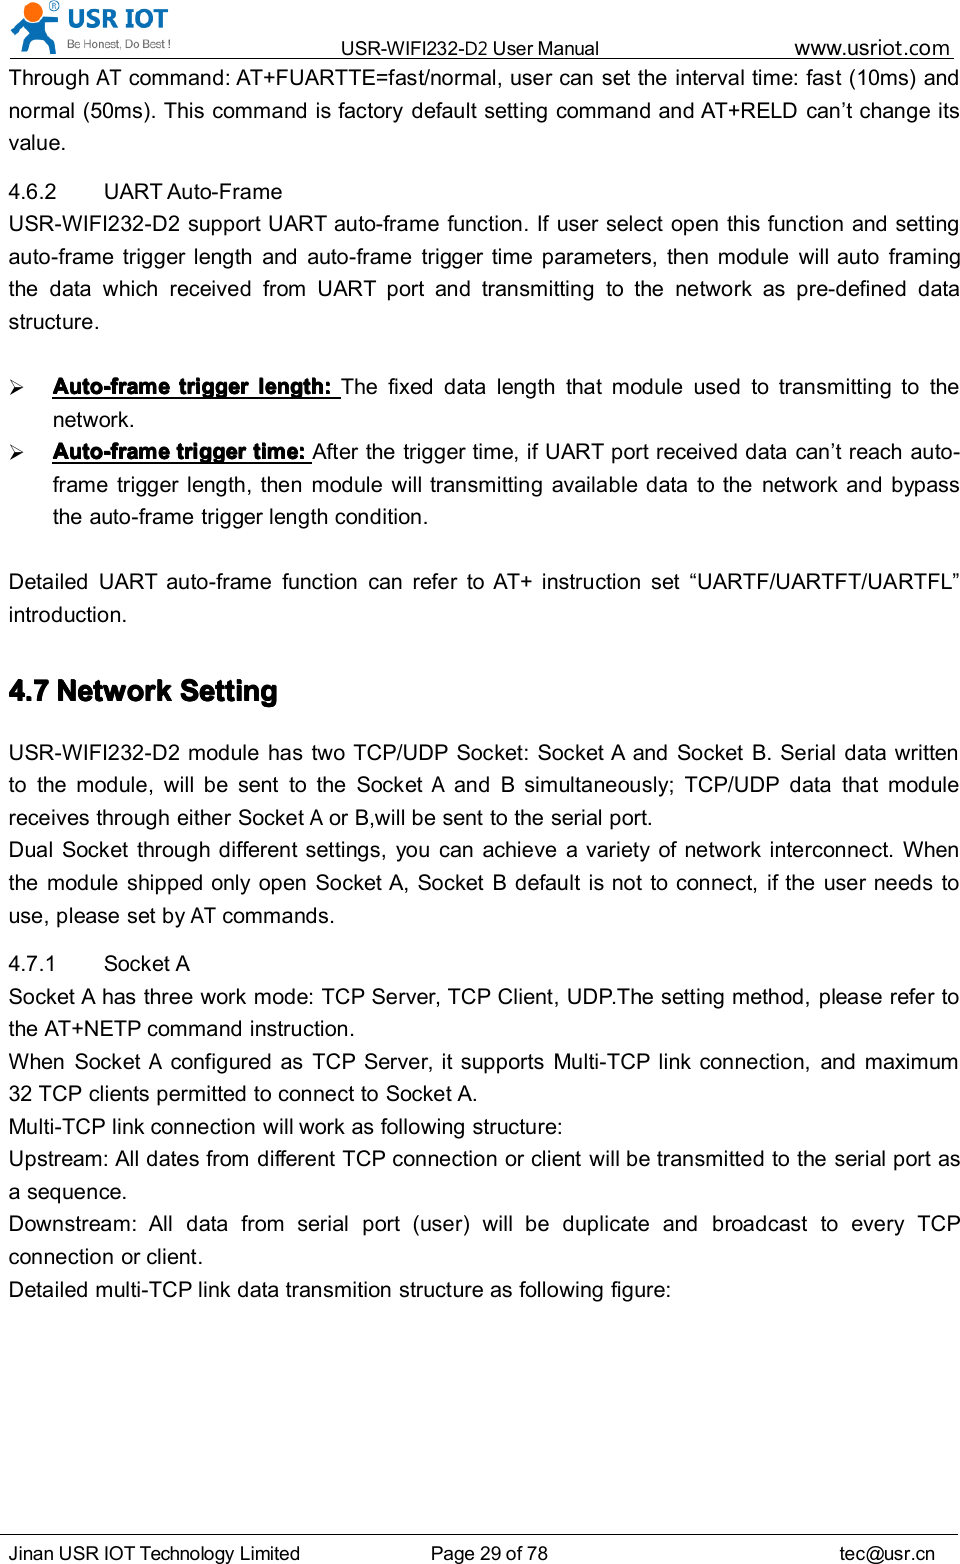 USR-WIFI232- D2 User Manual www.usr iot .comJinan USR IOT Technology Limited Page 29 of 78 tec@usr.cnThroughATcommand: AT+FUARTTE=fas t /normal, user can set the interval time: fast (10ms) andnormal (50ms). This command is factory default setting command and AT+RELD can ’ t change itsvalue.4.6.2 UART Auto-FrameUSR-WIFI232-D2 support UART auto-frame function. If user select open this function and settingauto-frame trigger length and auto-frame trigger time parameters, then module will auto framingthe data which received from UART port and transmitting to the network as pre-defined datastructure.Auto-frameAuto-frameAuto-frameAuto-frame triggertriggertriggertrigger length:length:length:length: The fixed data length that module used to transmitting to thenetwork.Auto-frameAuto-frameAuto-frameAuto-frame triggertriggertriggertrigger time:time:time:time: After the trigger time, if UART port received data can ’ t reach auto-frame trigger length, then module will transmitting available data to the network and bypassthe auto-frame trigger length condition.Detailed UART auto-frame function can refer to AT+ instruction set “ UARTF/UARTFT/UARTFL ”introduction.4.74.74.74.7 NetworkNetworkNetworkNetwork SettingSettingSettingSettingUSR-WIFI232-D2 module has two TCP/UDP Socket: Socket A and Socket B. Serial data writtento the module, will be sent to the SocketAand B simultaneously; TCP/UDP data that modulereceives through either SocketAor B,will be sent to the serial port.Dual Socket through different settings, you can achieve a variety of network interconnect. Whenthe module shipped only open Socket A, Socket B default is not to connect, if the user needs touse, please set byATcommands.4.7.1 Socket ASocket A has three work mode: TCP Server, TCP Client, UDP.The setting method, please refer tothe AT+NETP command instruction.When SocketAconfigured as TCP Server, it supports Multi-TCP link connection, and maximum32 TCP clients permitted to connect to Socket A.Multi-TCP link connection will work as following structure:Upstream: All dates from different TCP connection or client will be transmitted to the serial port asa sequence.Downstream: All data from serial port (user) will be duplicate and broadcast to every TCPconnection or client.Detailed multi-TCP link data transmition structure as following figure: